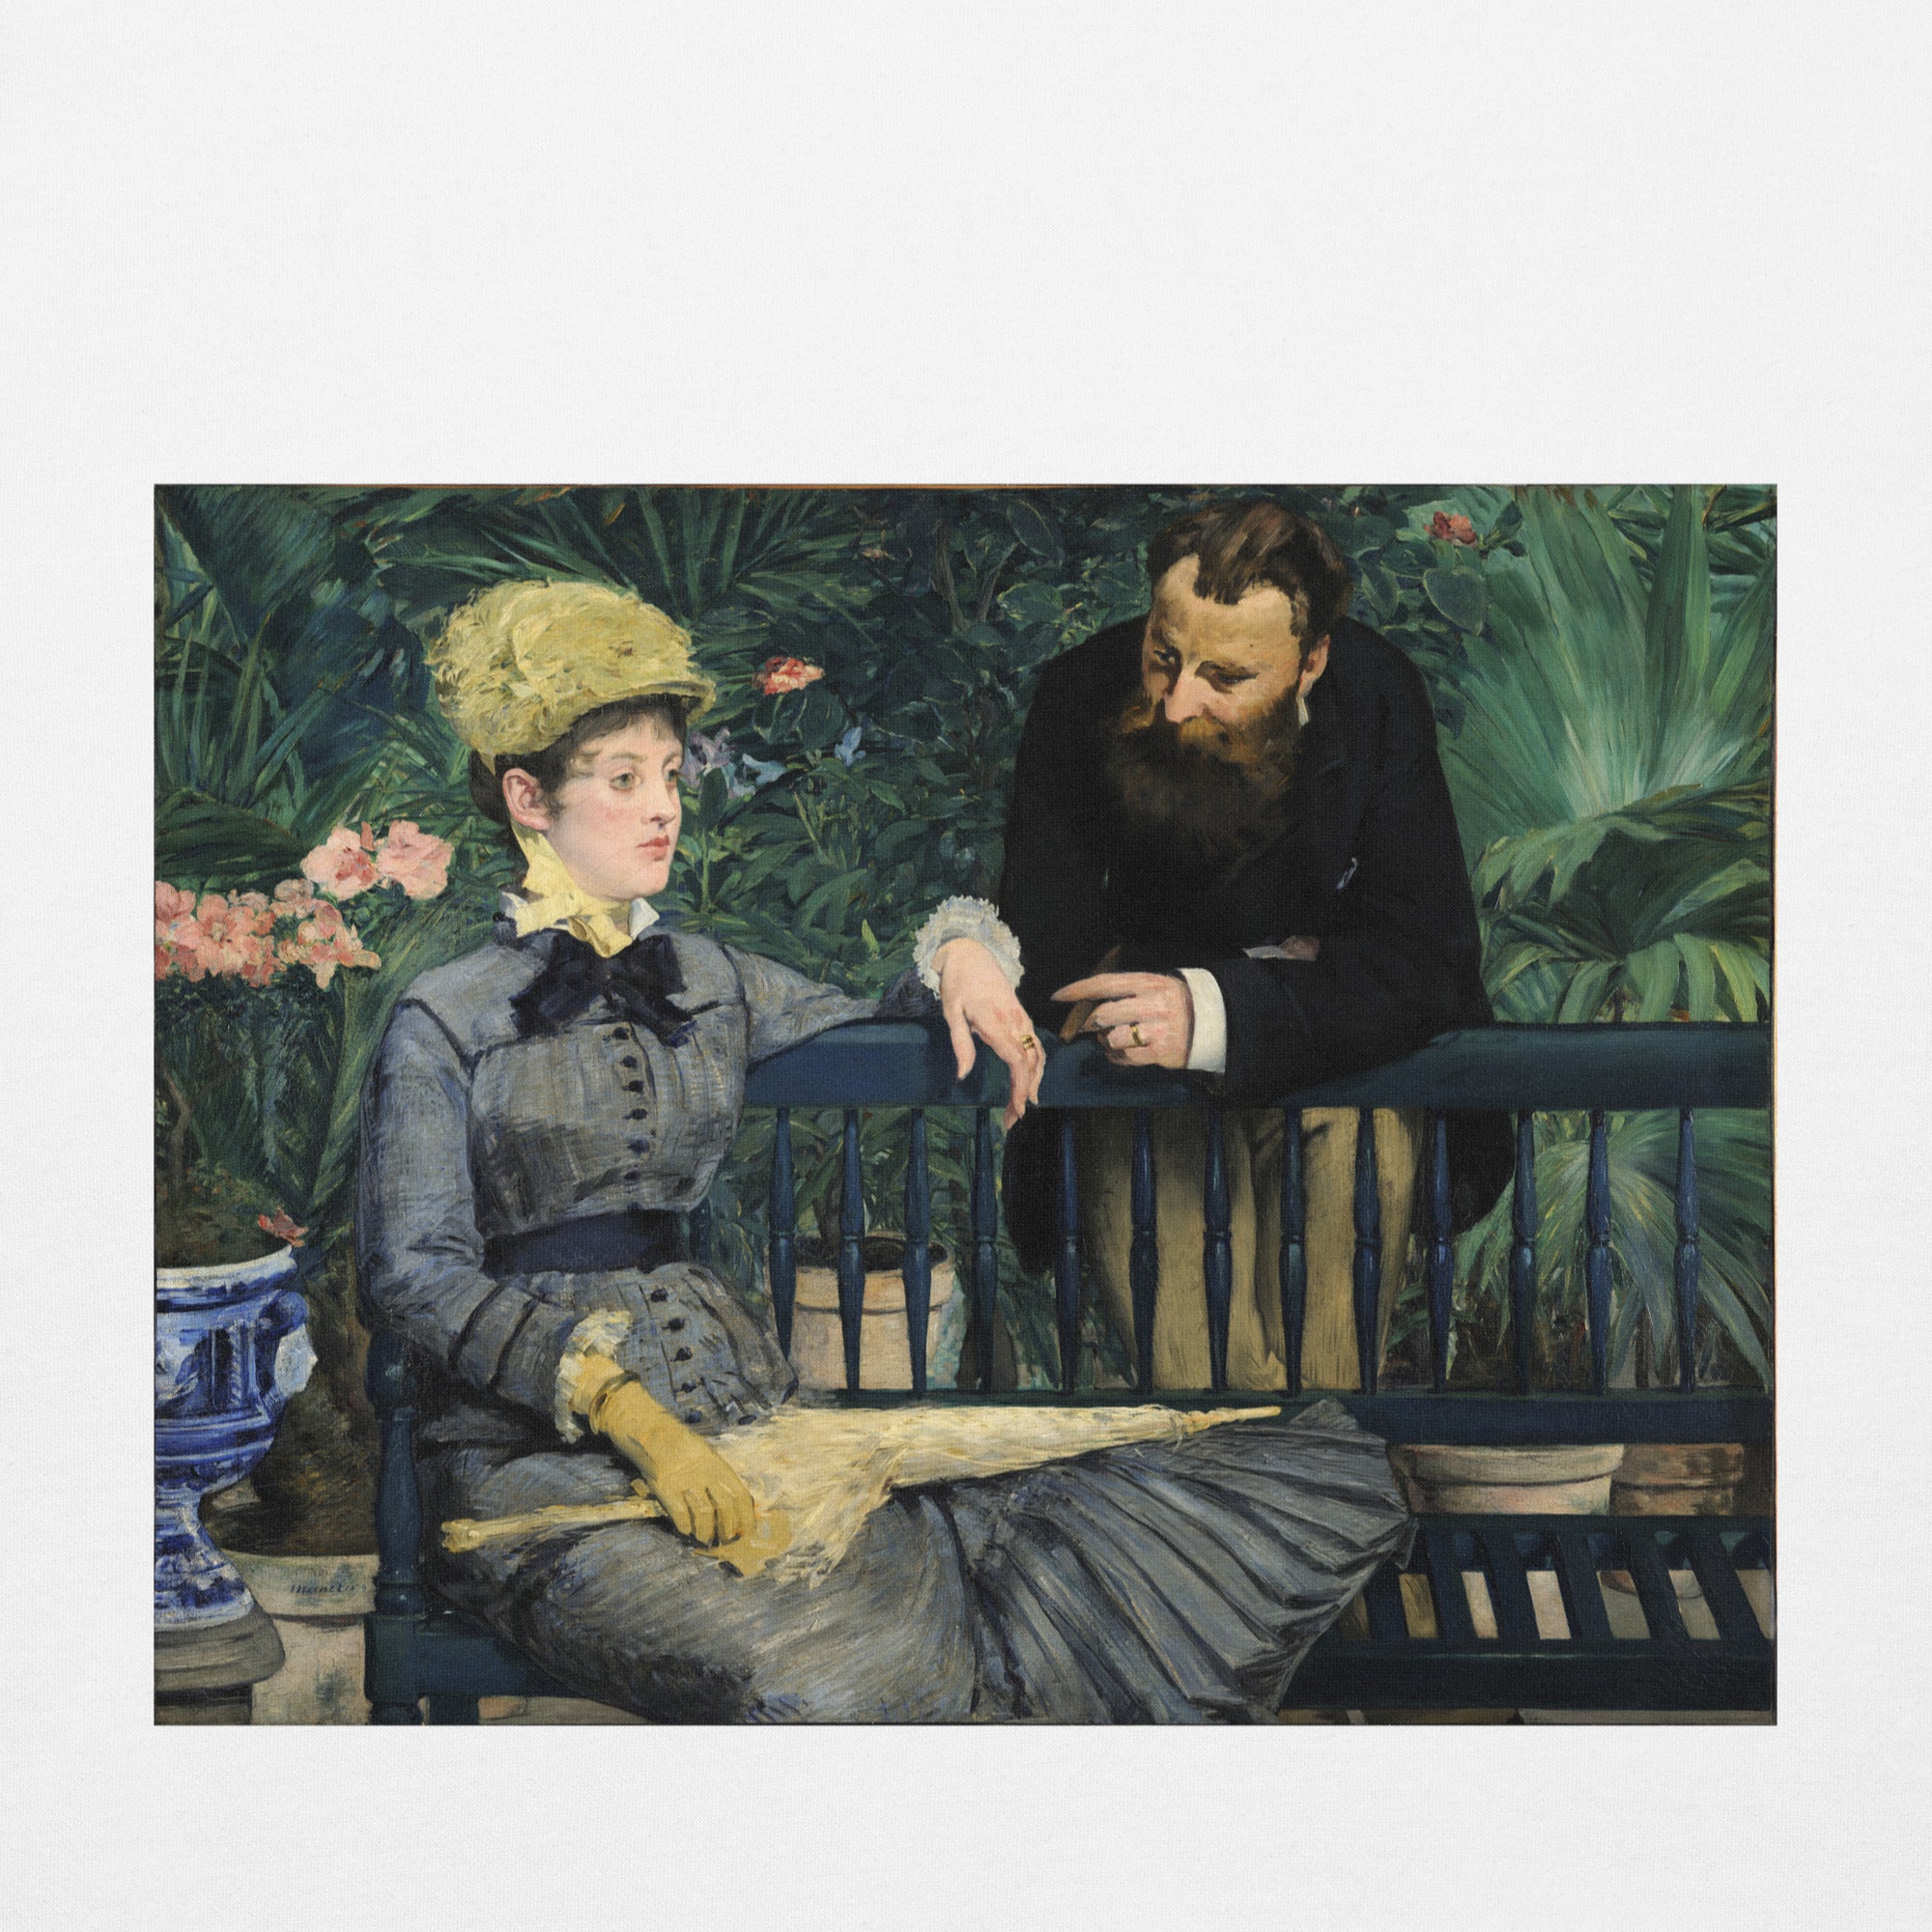 Édouard Manet 'In the Conservatory' Famous Painting Hoodie | Unisex Premium Art Hoodie